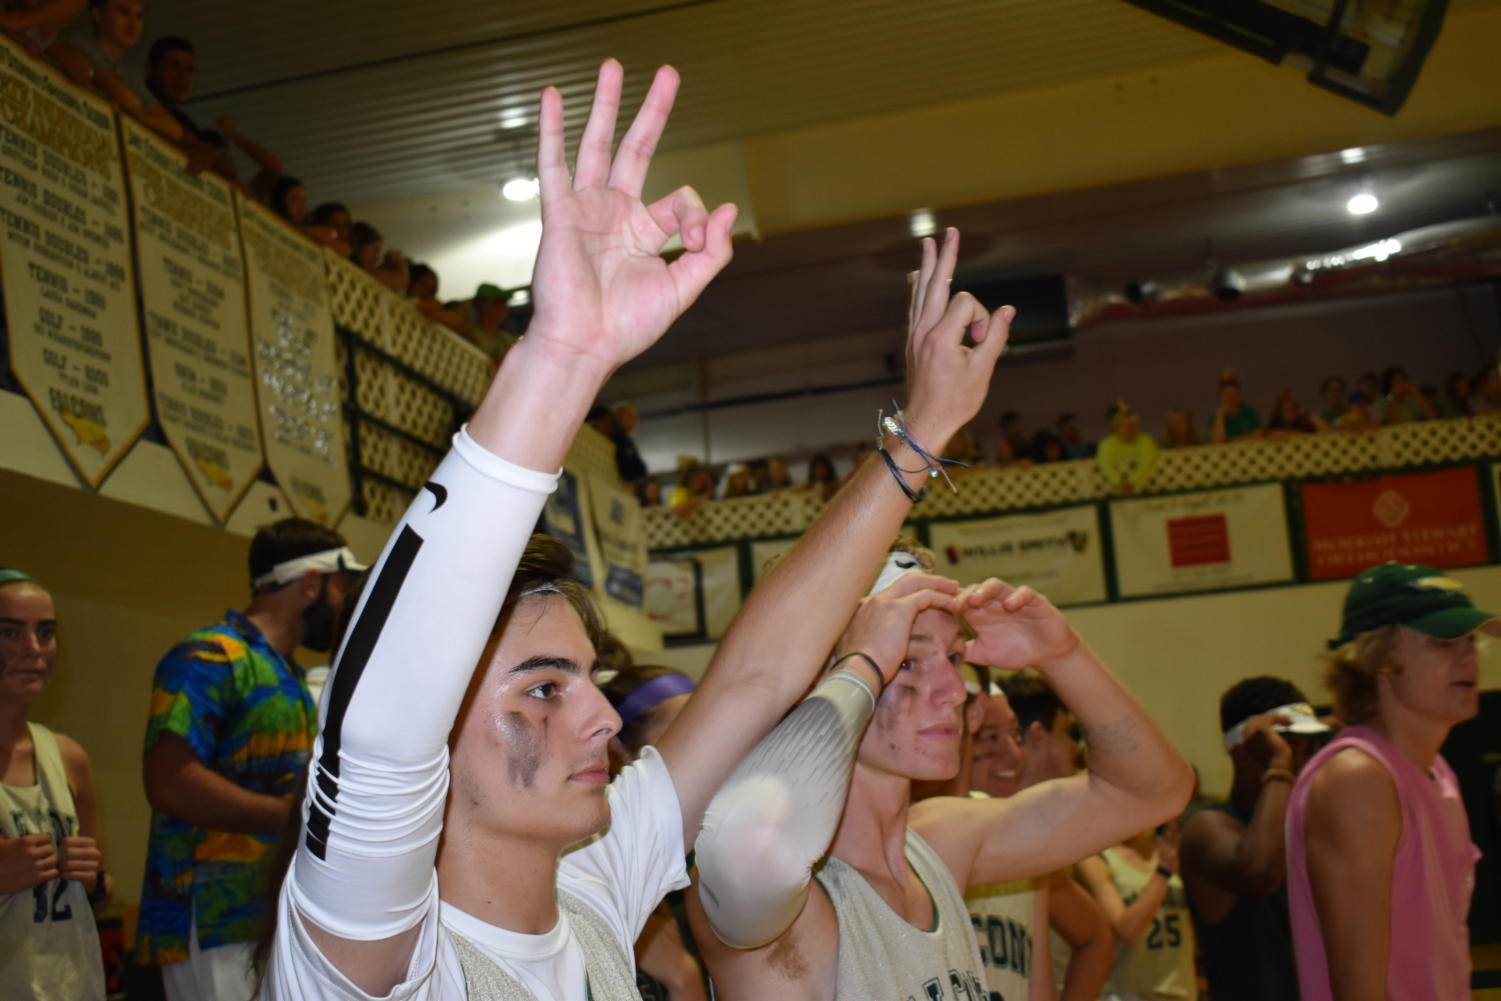 Homecoming+week+day+4+photo+gallery%3A+Basketball+Game